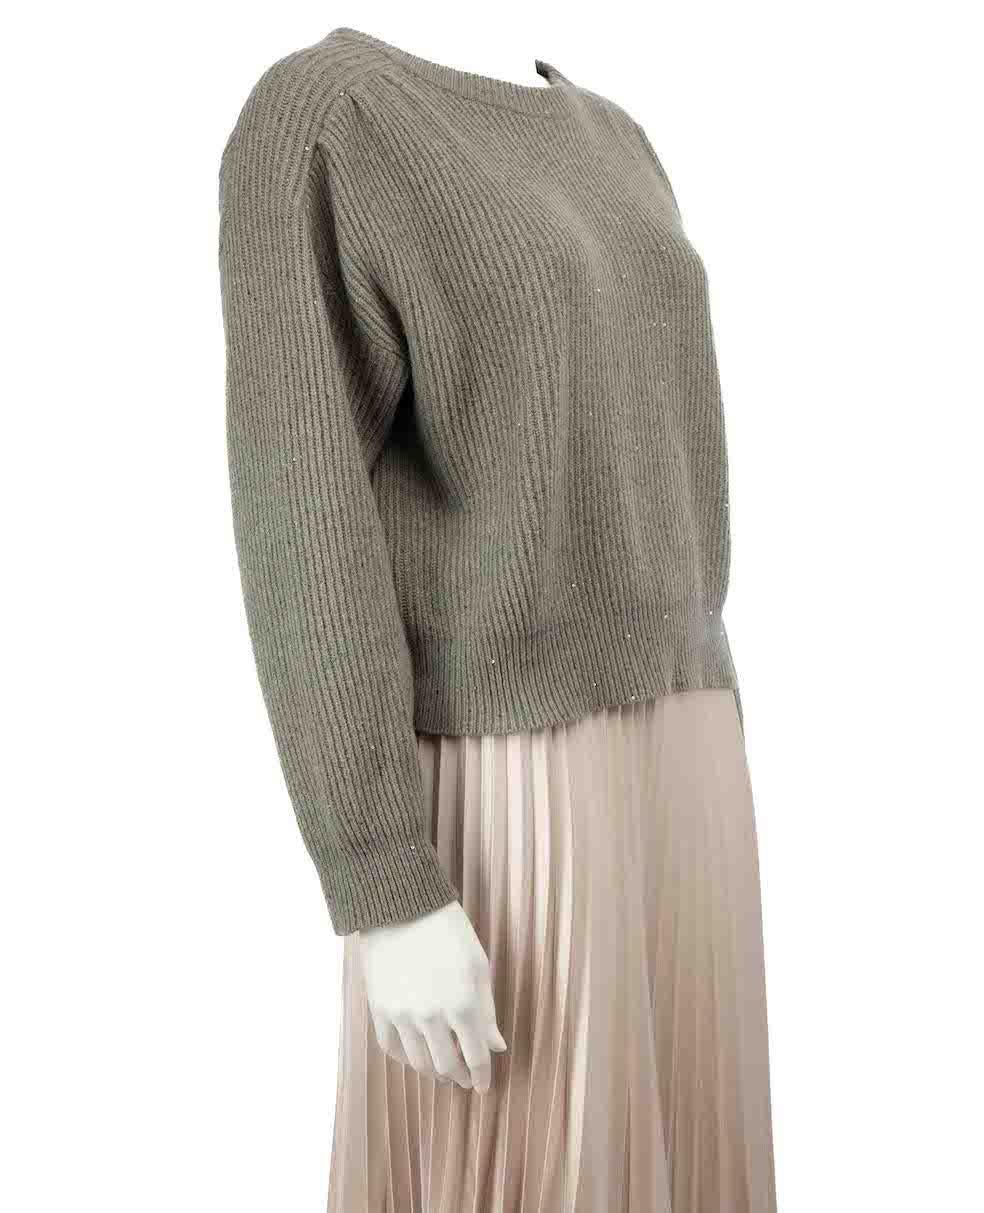 CONDITION is Very good. Hardly any visible wear to jumper is evident on this used Brunello Cucinelli designer resale item.
 
 Details
 Grey with green undertone
 Cashmere
 Long sleeves jumper
 Knitted and stretchy
 Round neckline
 Glitter sequin